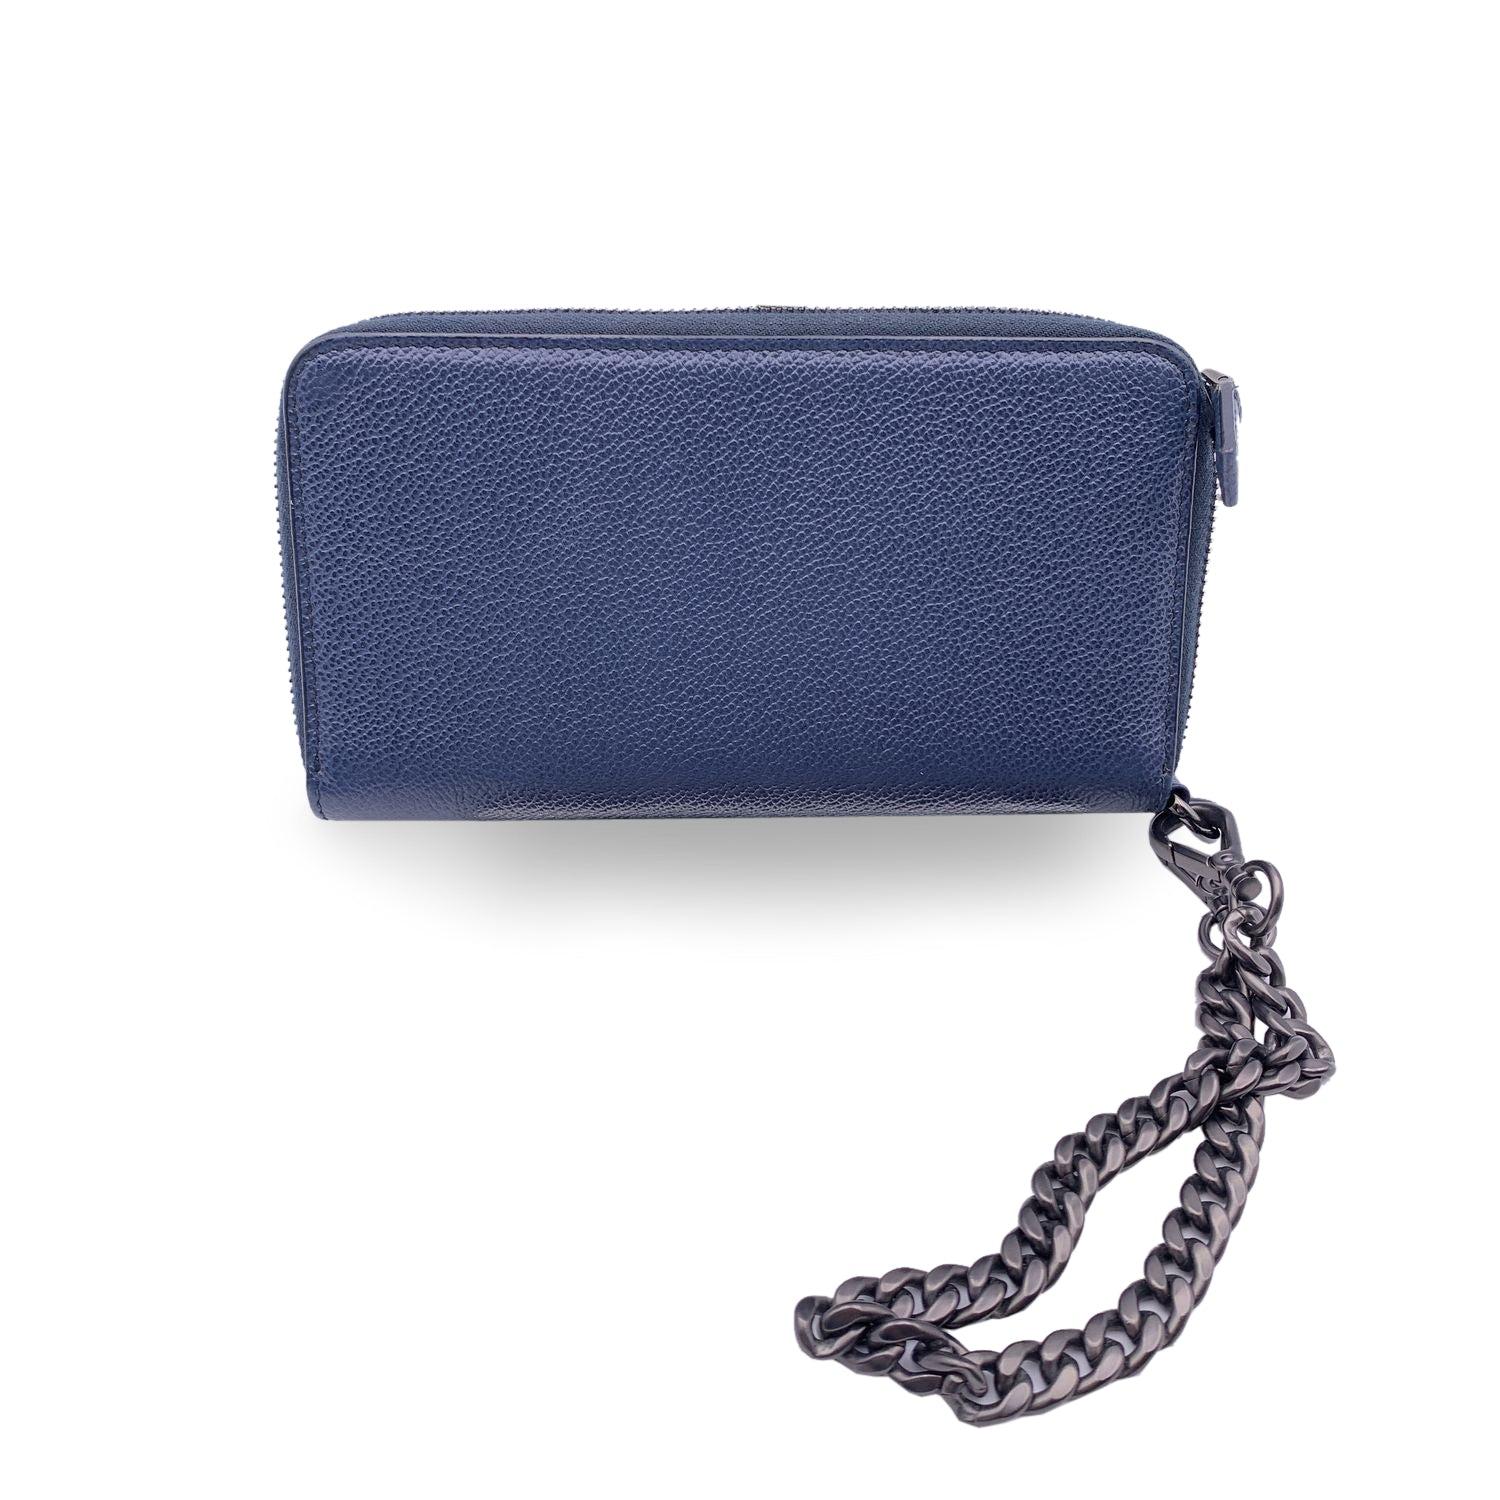 This beautiful Bag will come with a Certificate of Authenticity provided by Entrupy. The certificate will be provided at no further cost Prada long wallet in chain in blue leather. Gunmetal PRADA logo lettering on the front and gunmetal chain wrist